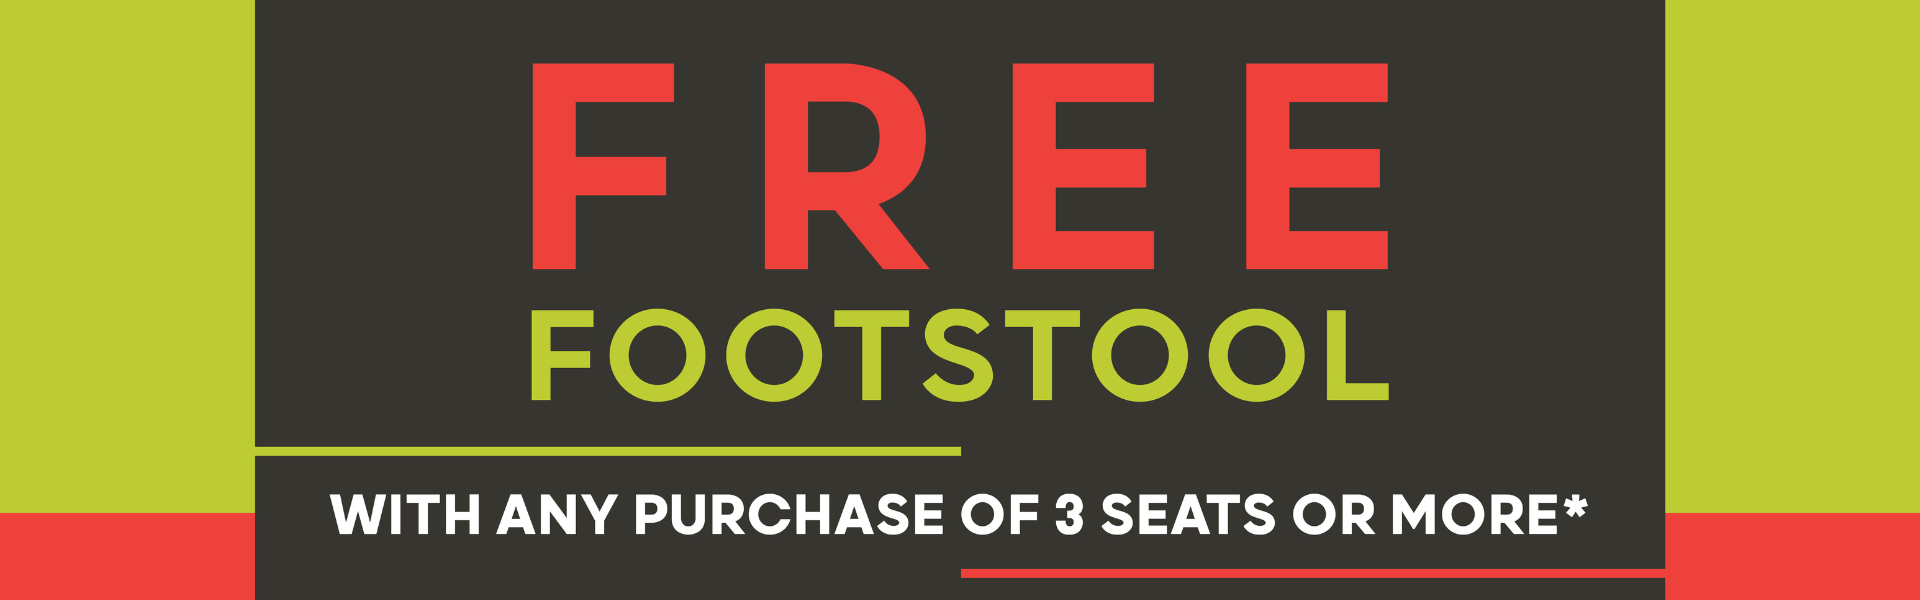 Jay Blades Free Footstool Landing Page Banner